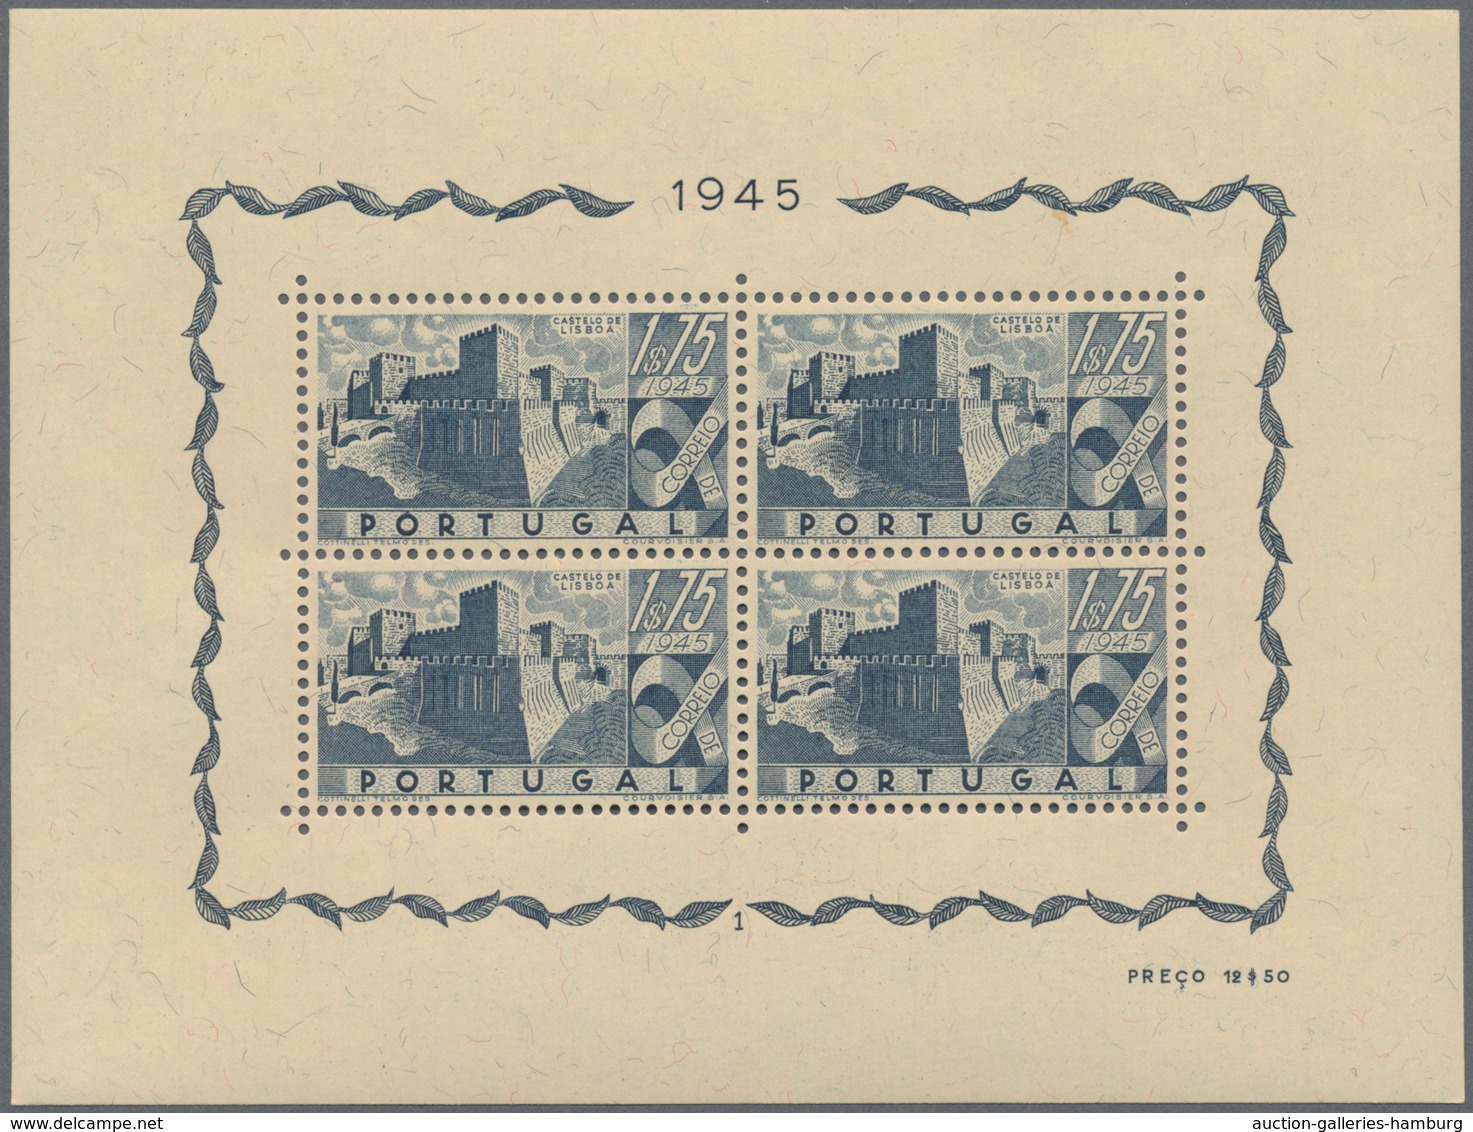 Portugal: 1946, Portuguese castles ‚set of four‘ miniature sheets with plate numbers 1 to 4, mint ne